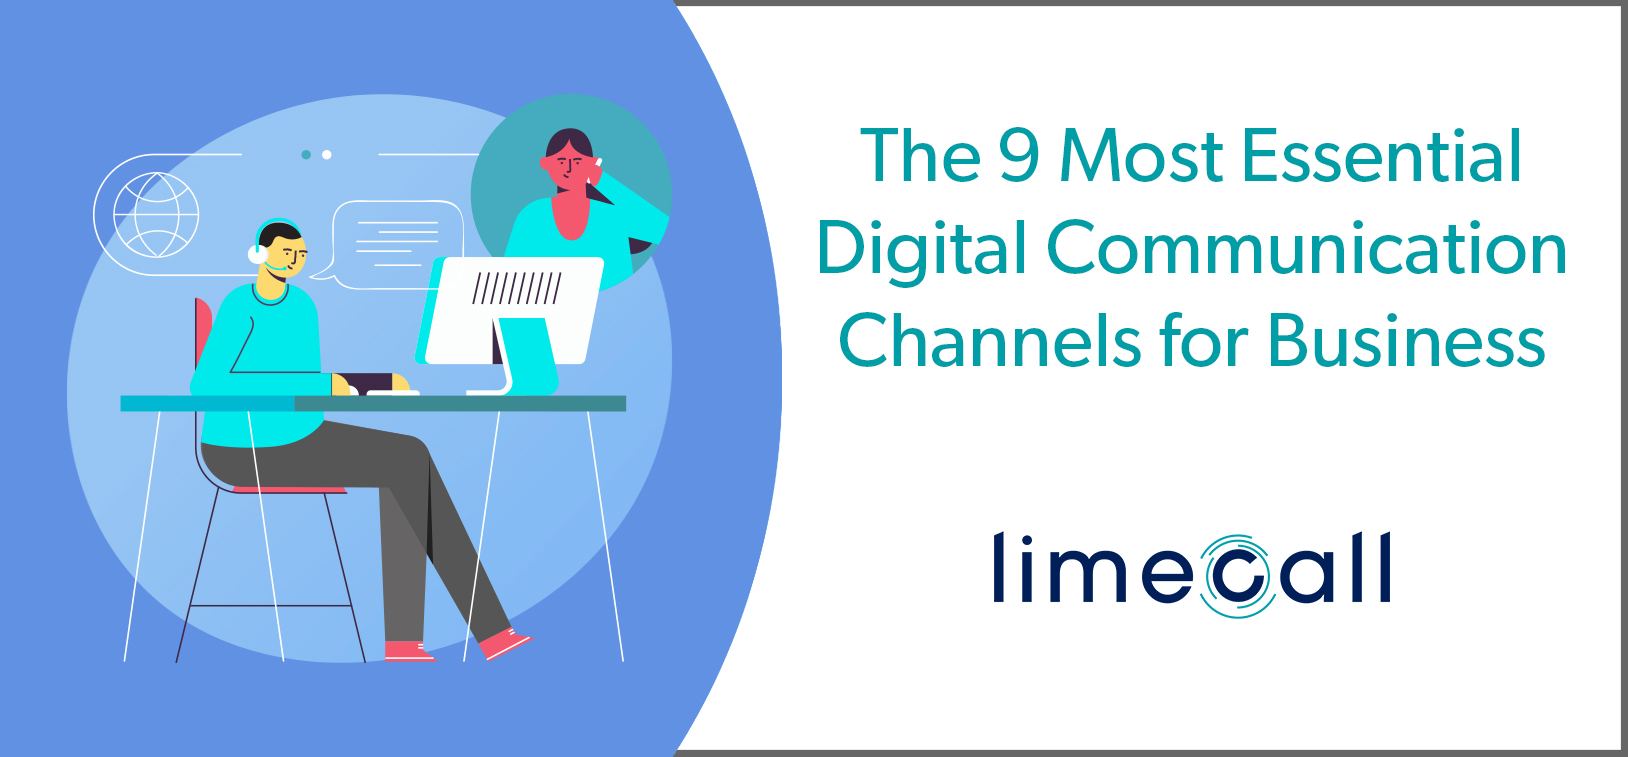 The 9 Most Essential Digital Communication Channels for Business